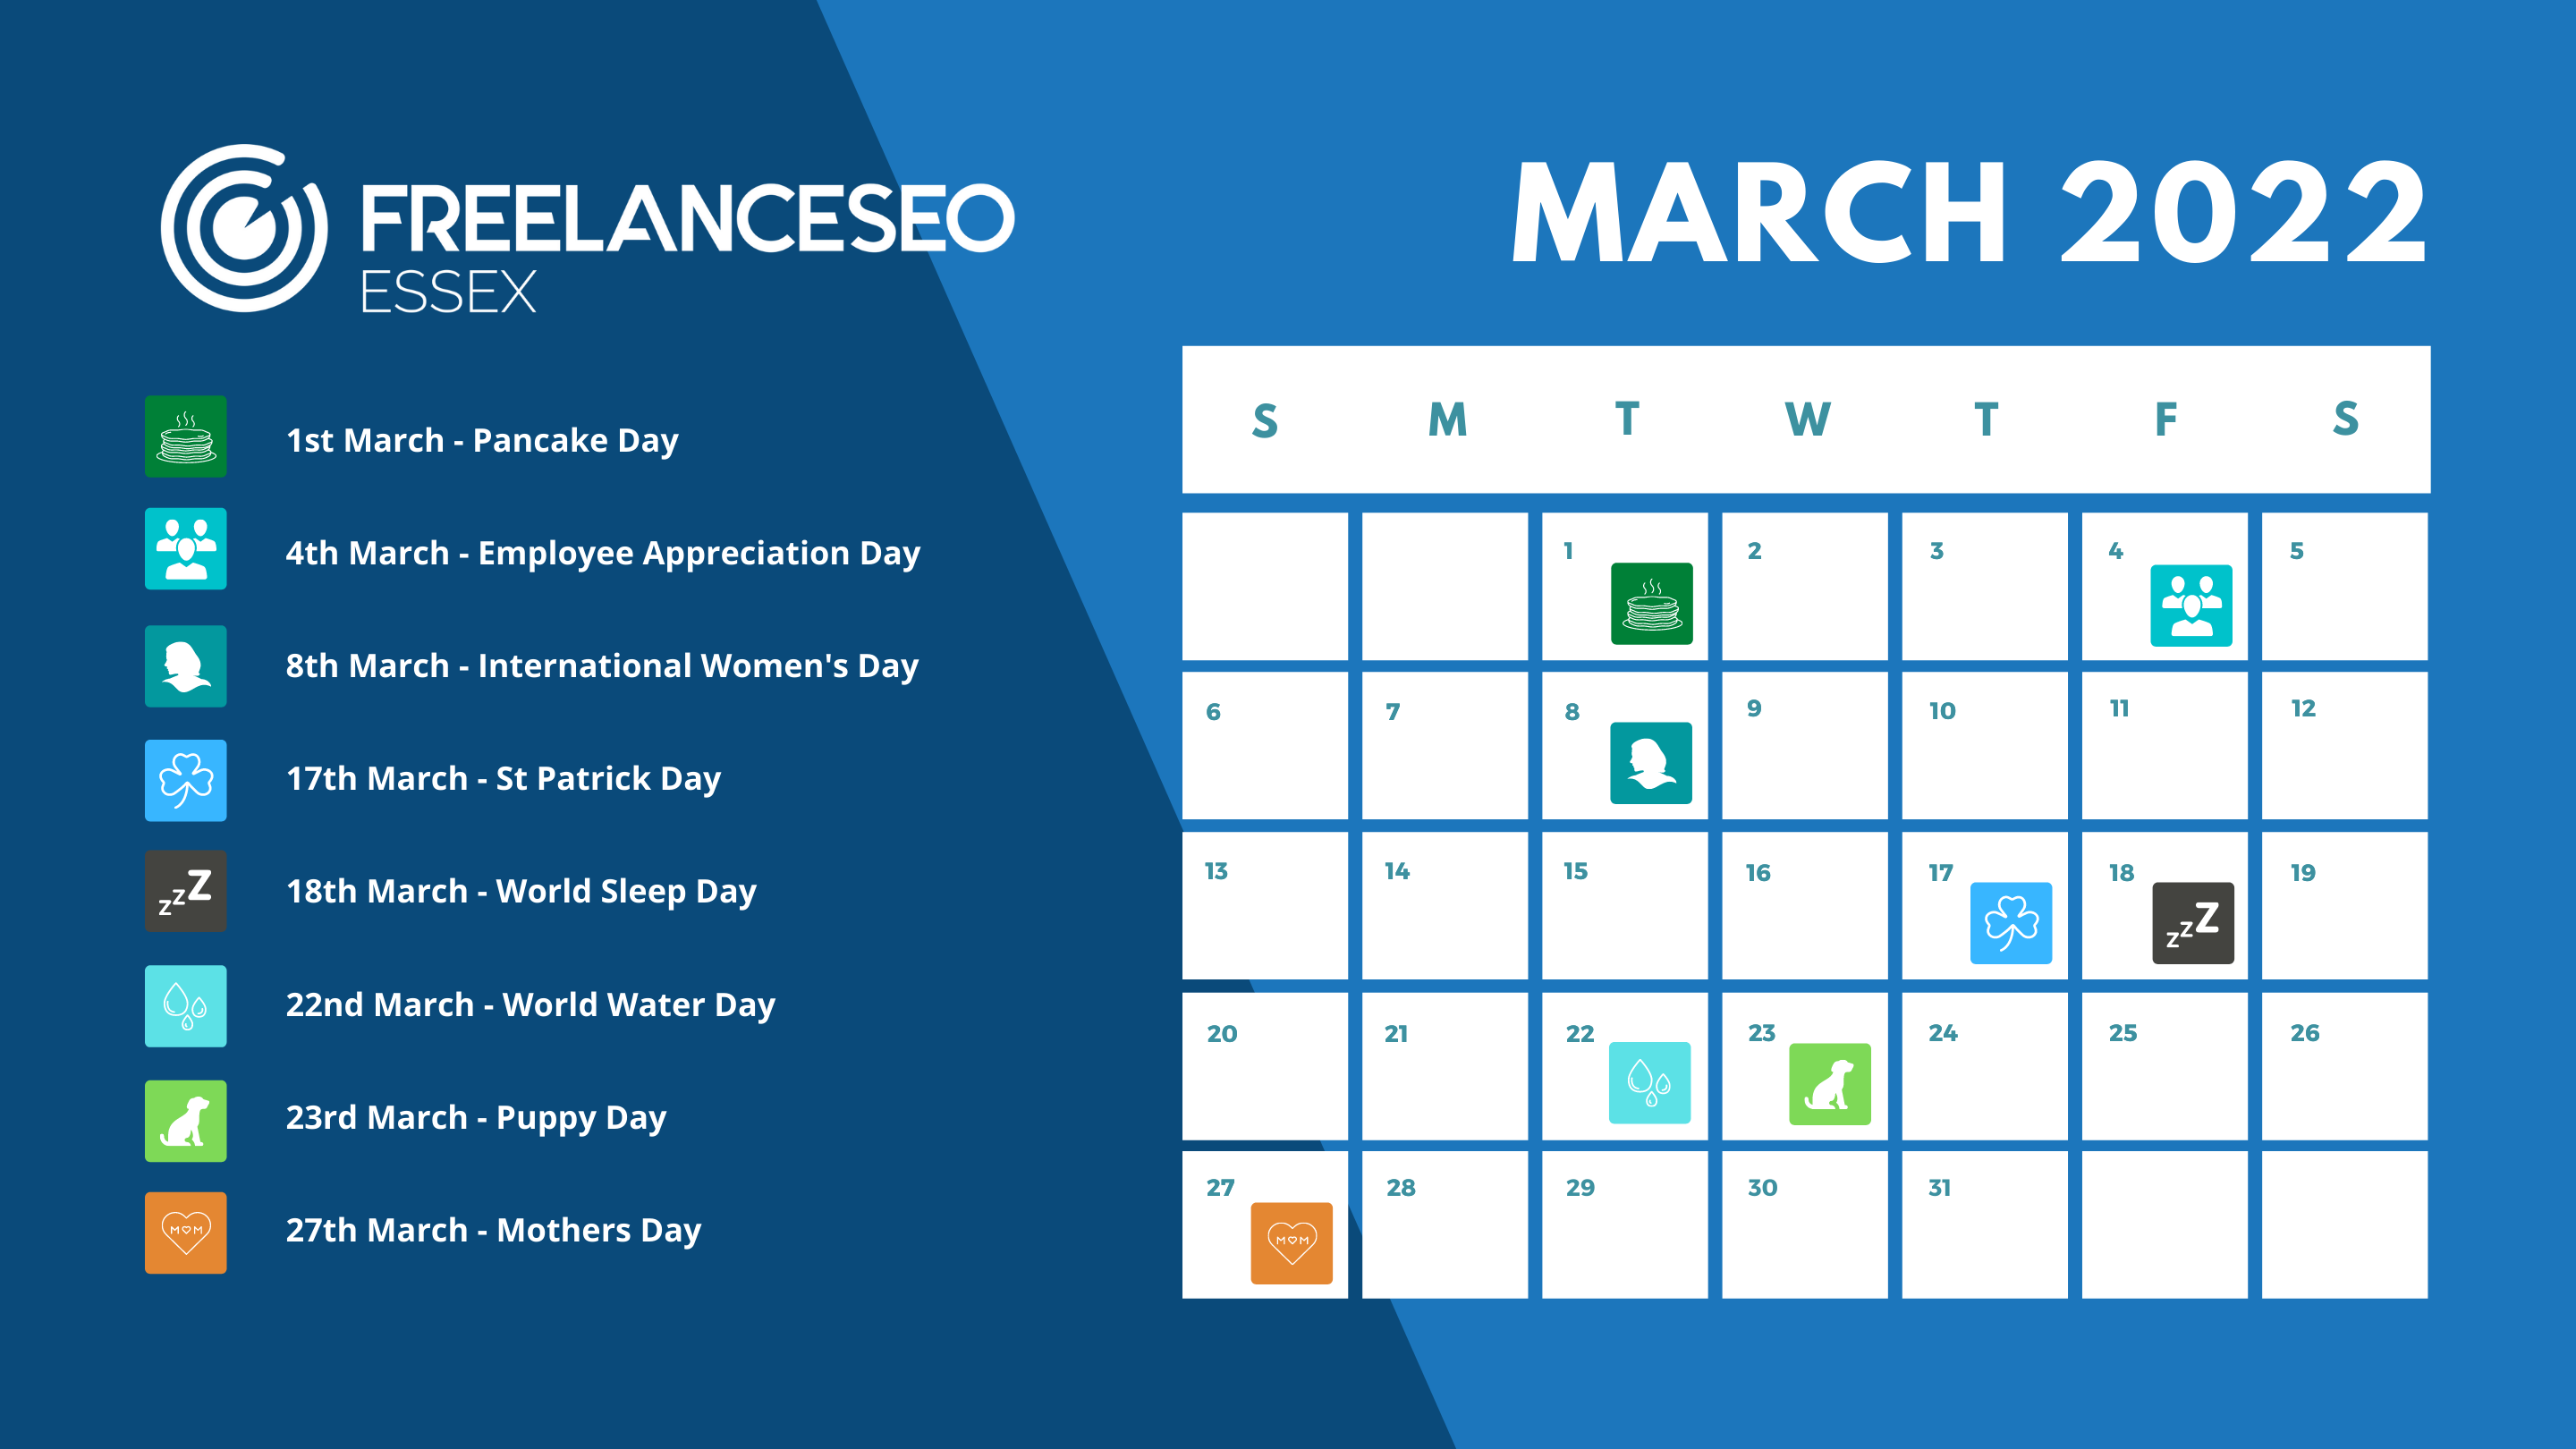 March 2022 Social calendar dates for your diary